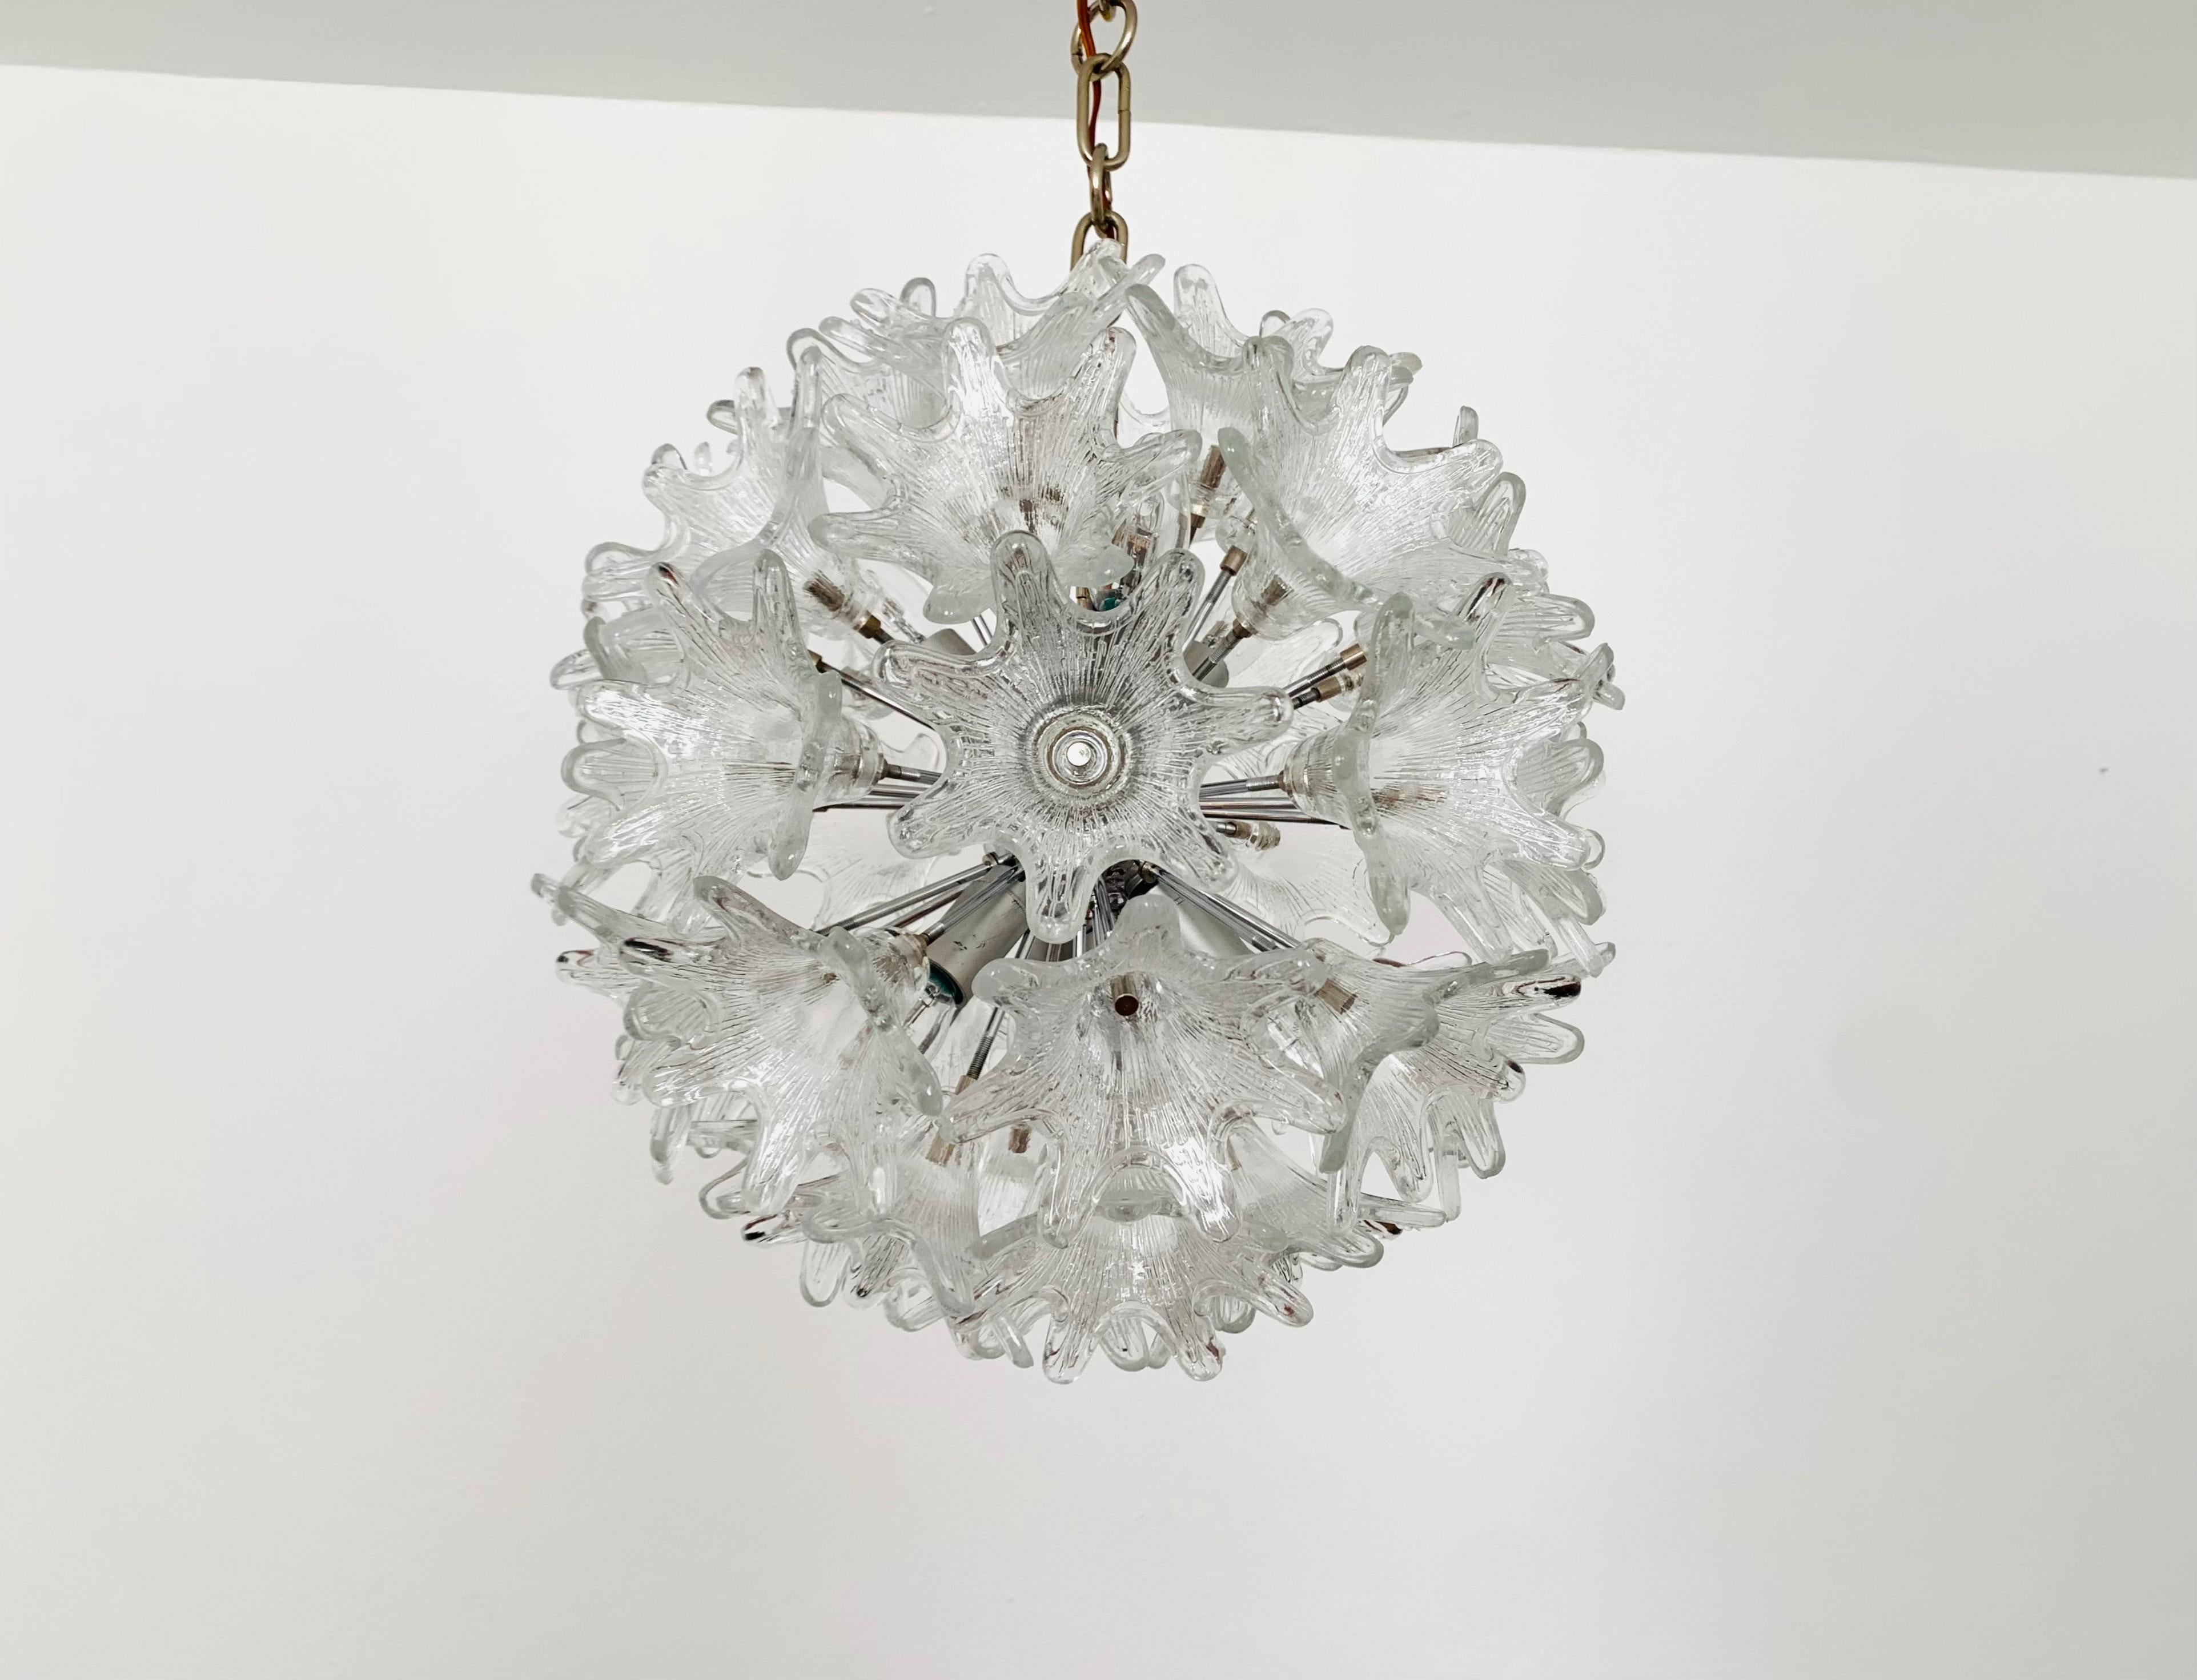 Wonderful Italian Murano glass chandelier by Paolo Venini from the 1960s.
Extraordinarily successful design and very high-quality workmanship.
The 41 flowers create a spectacular play of light in the room.

Design: Paolo Venini
Manufacturer: